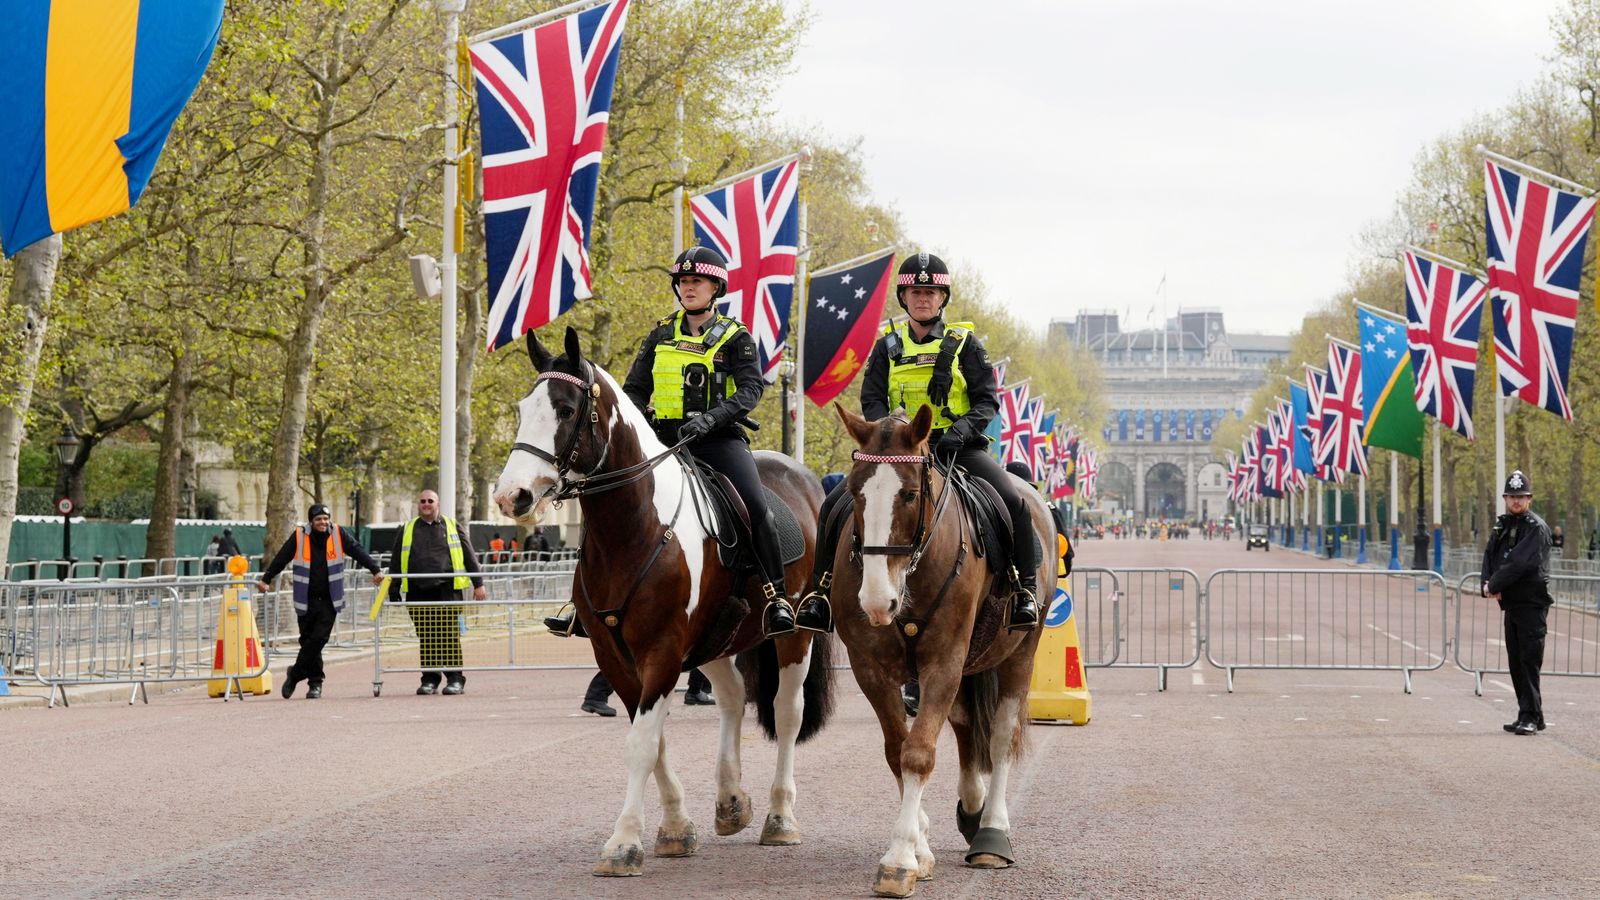 Greater police powers granted to tackle coronation disruption - but Buckingham Palace arrest highlights security concerns